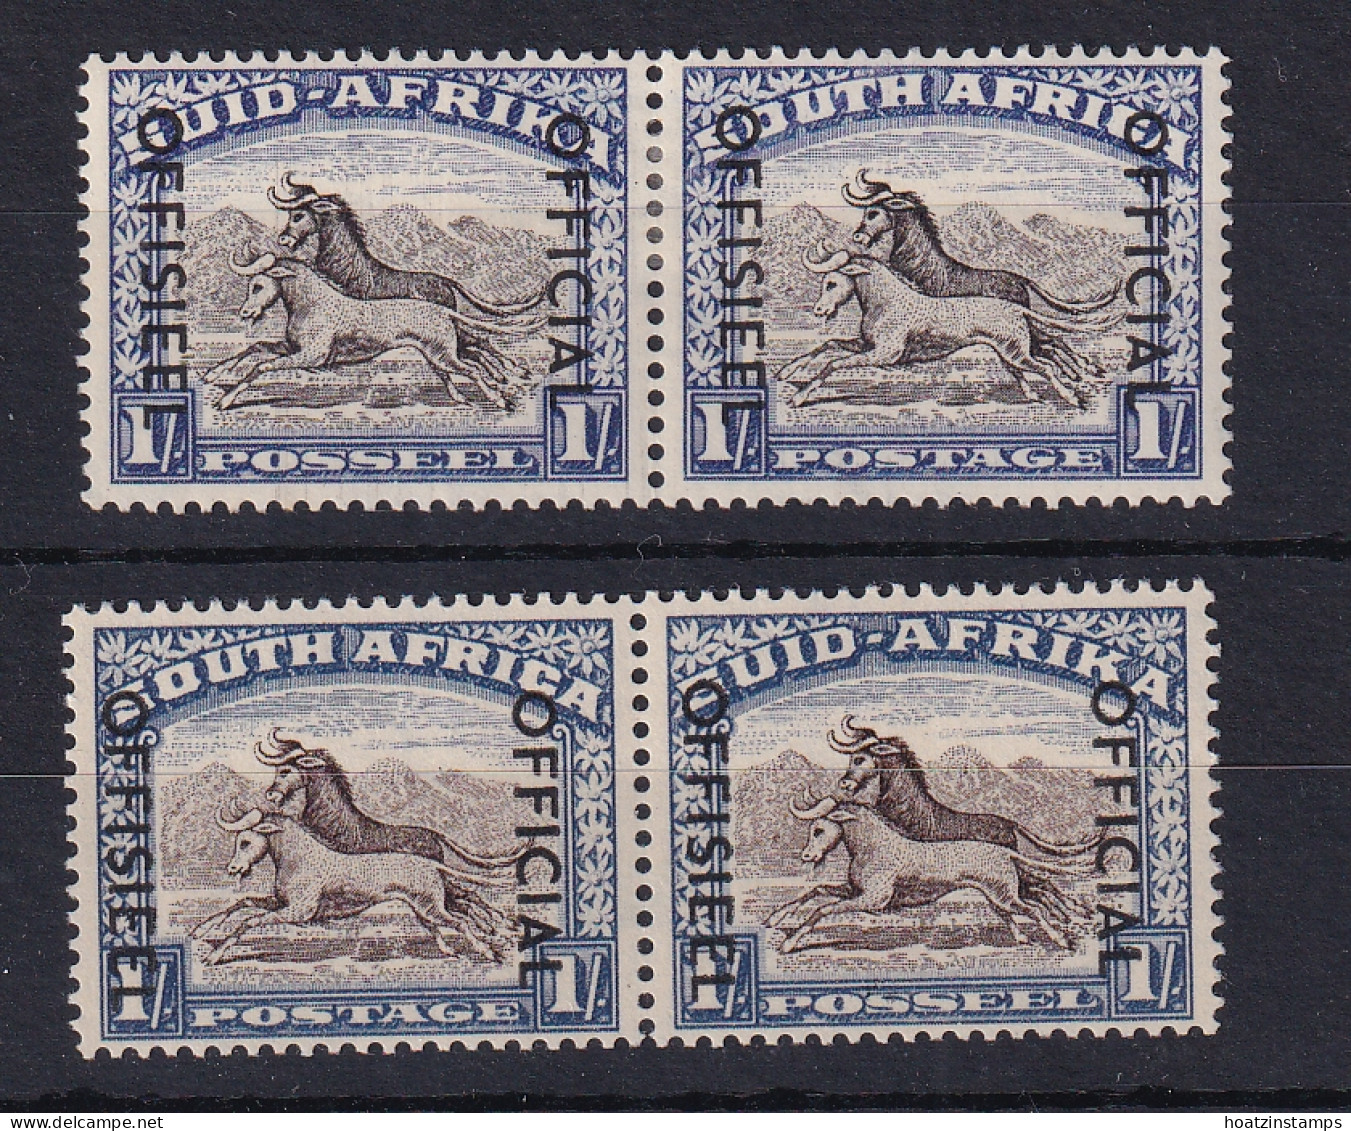 South Africa: 1950/54   Official - Wildebeest   SG O47 / O47a   1/-    MH Pair - Dienstmarken